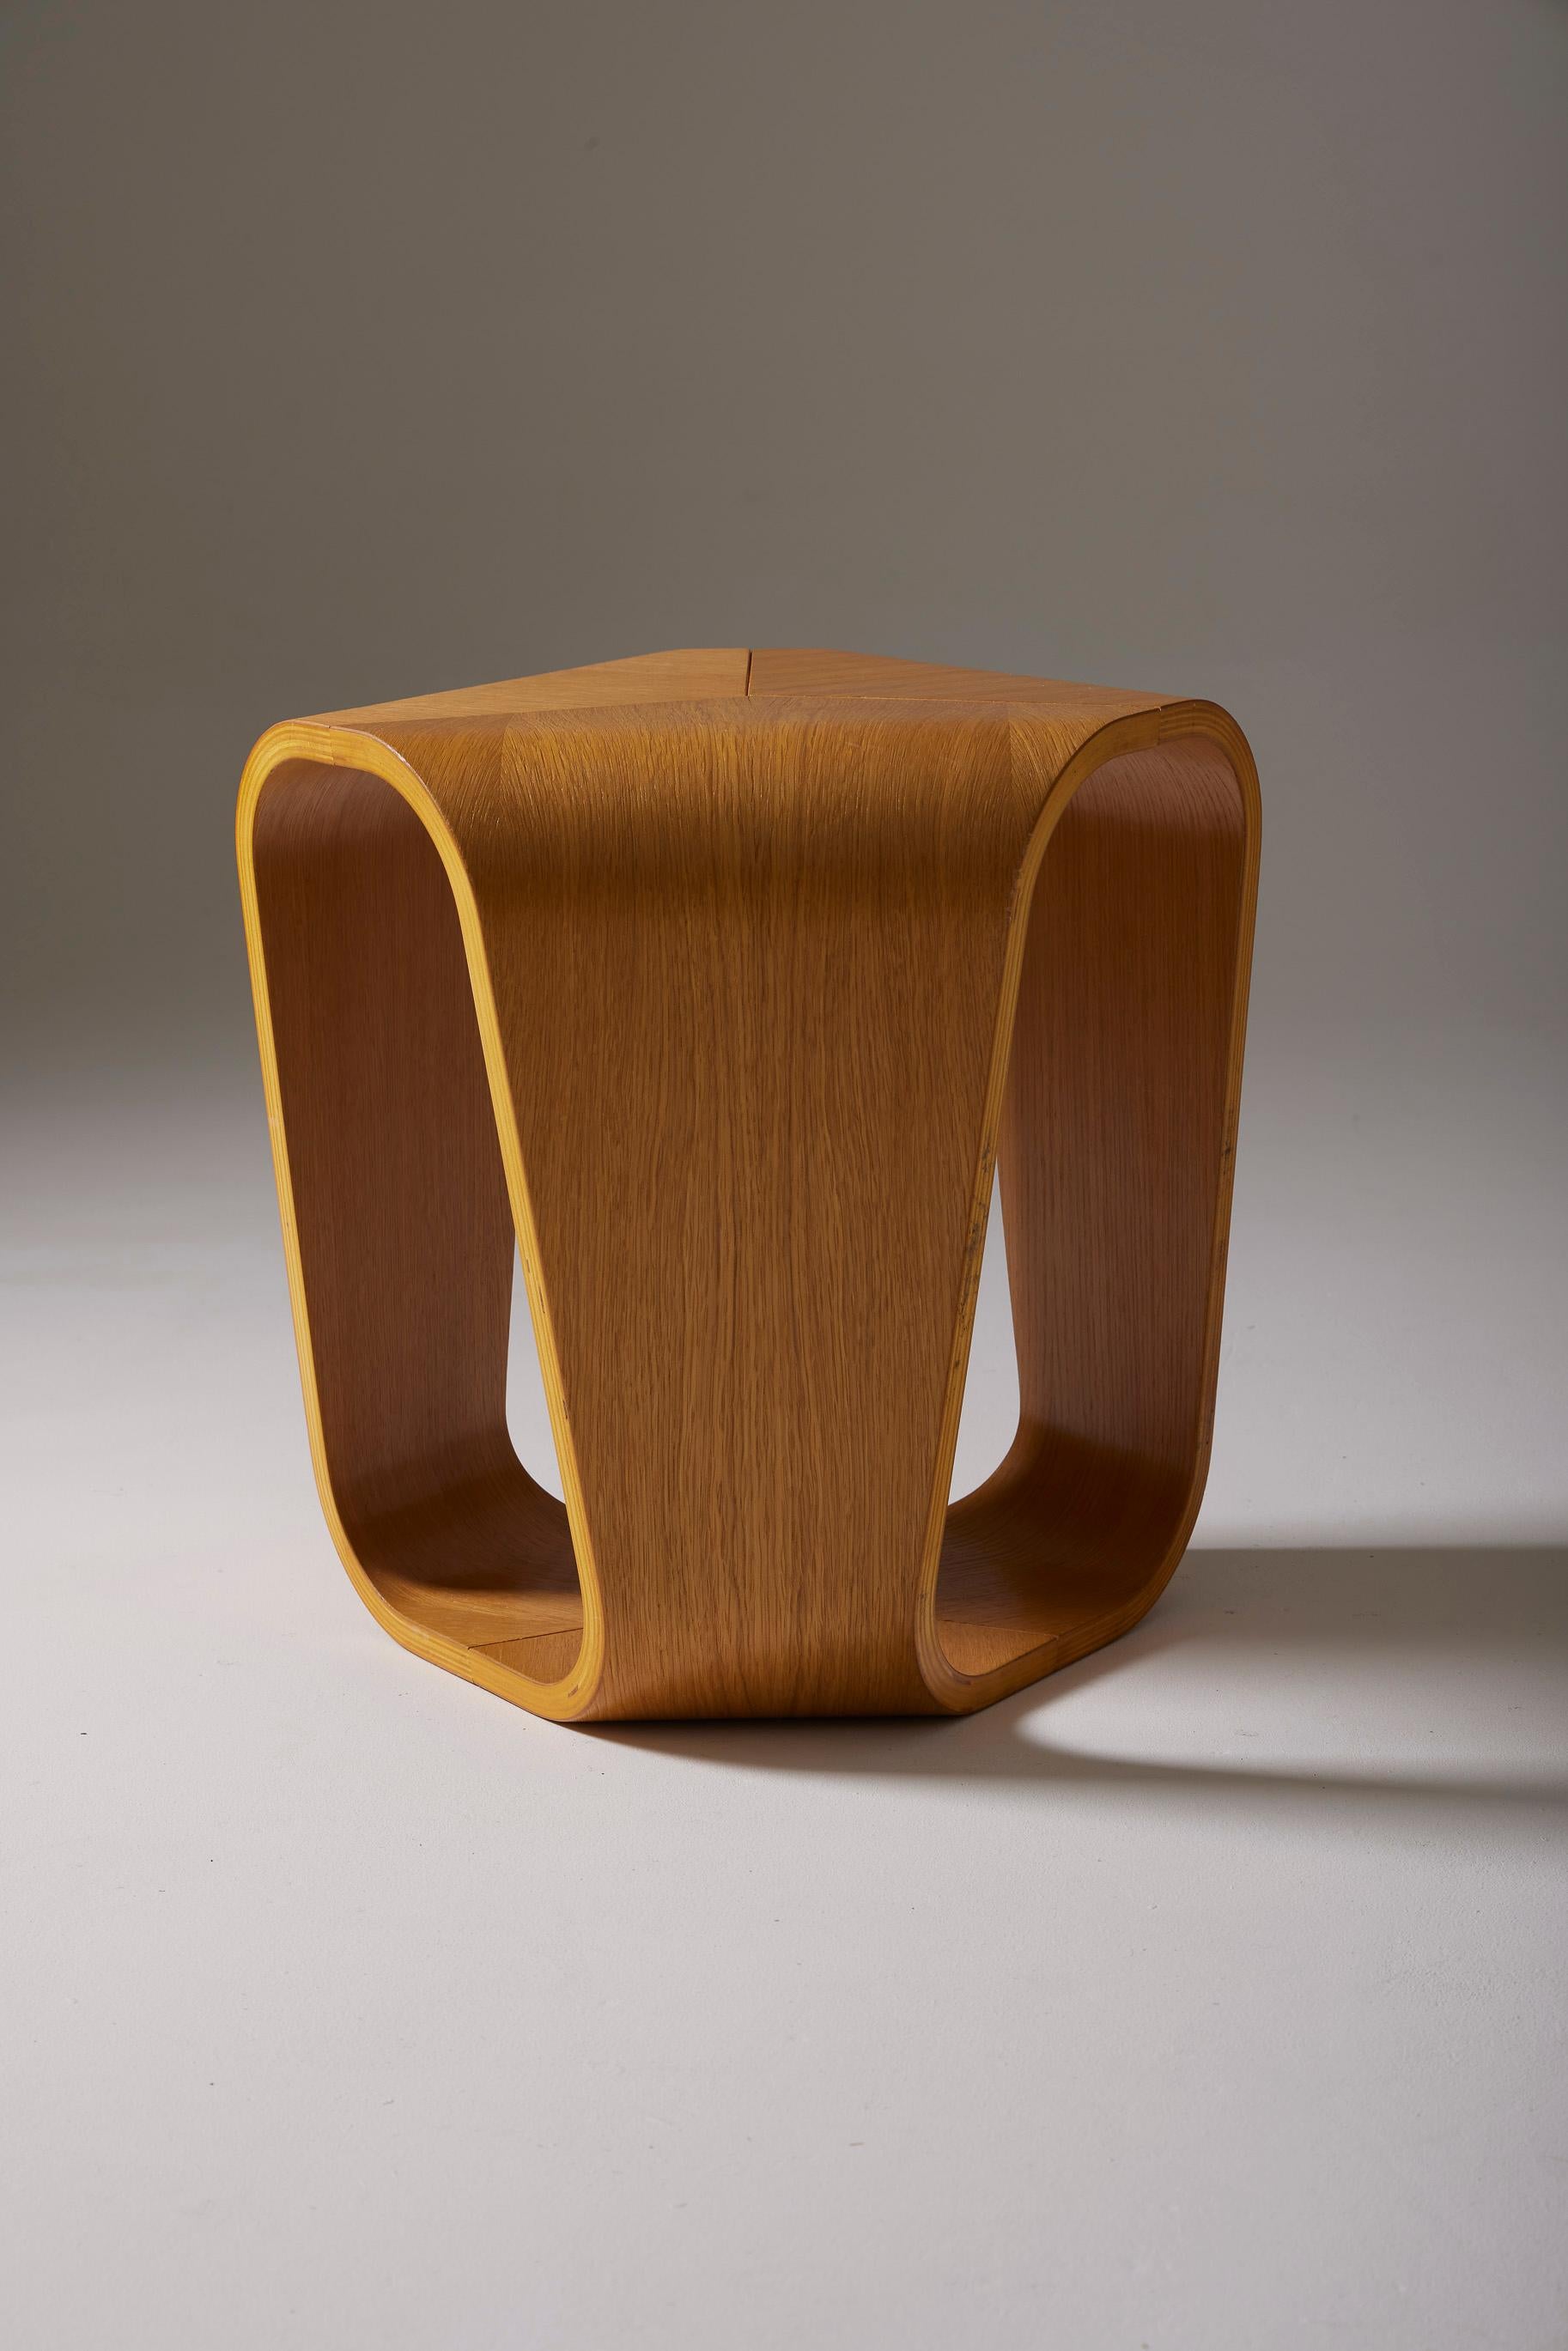 Wooden stool or side table by Italian designer Enrico Cesana for Busnelli in the 1990s. The design of this stool echoes the taste of the 1970s and resonates with the echoes of the space-age design era. A very fine piece in very good